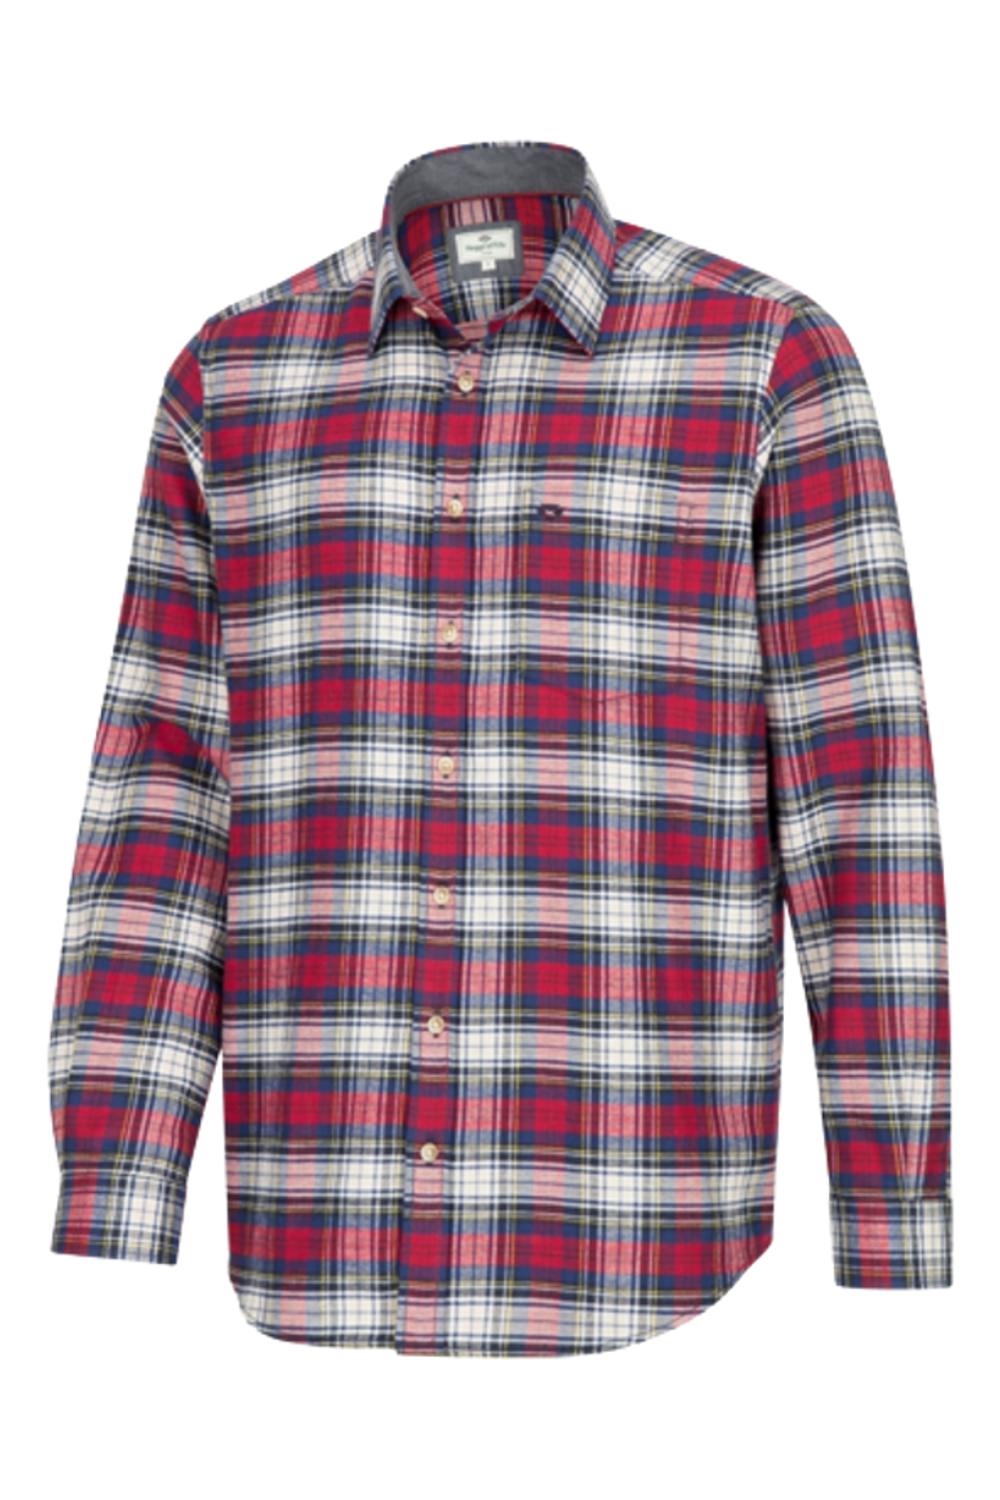 Hoggs of Fife Pitscottie Flannel Shirt in Red Tartan Check 